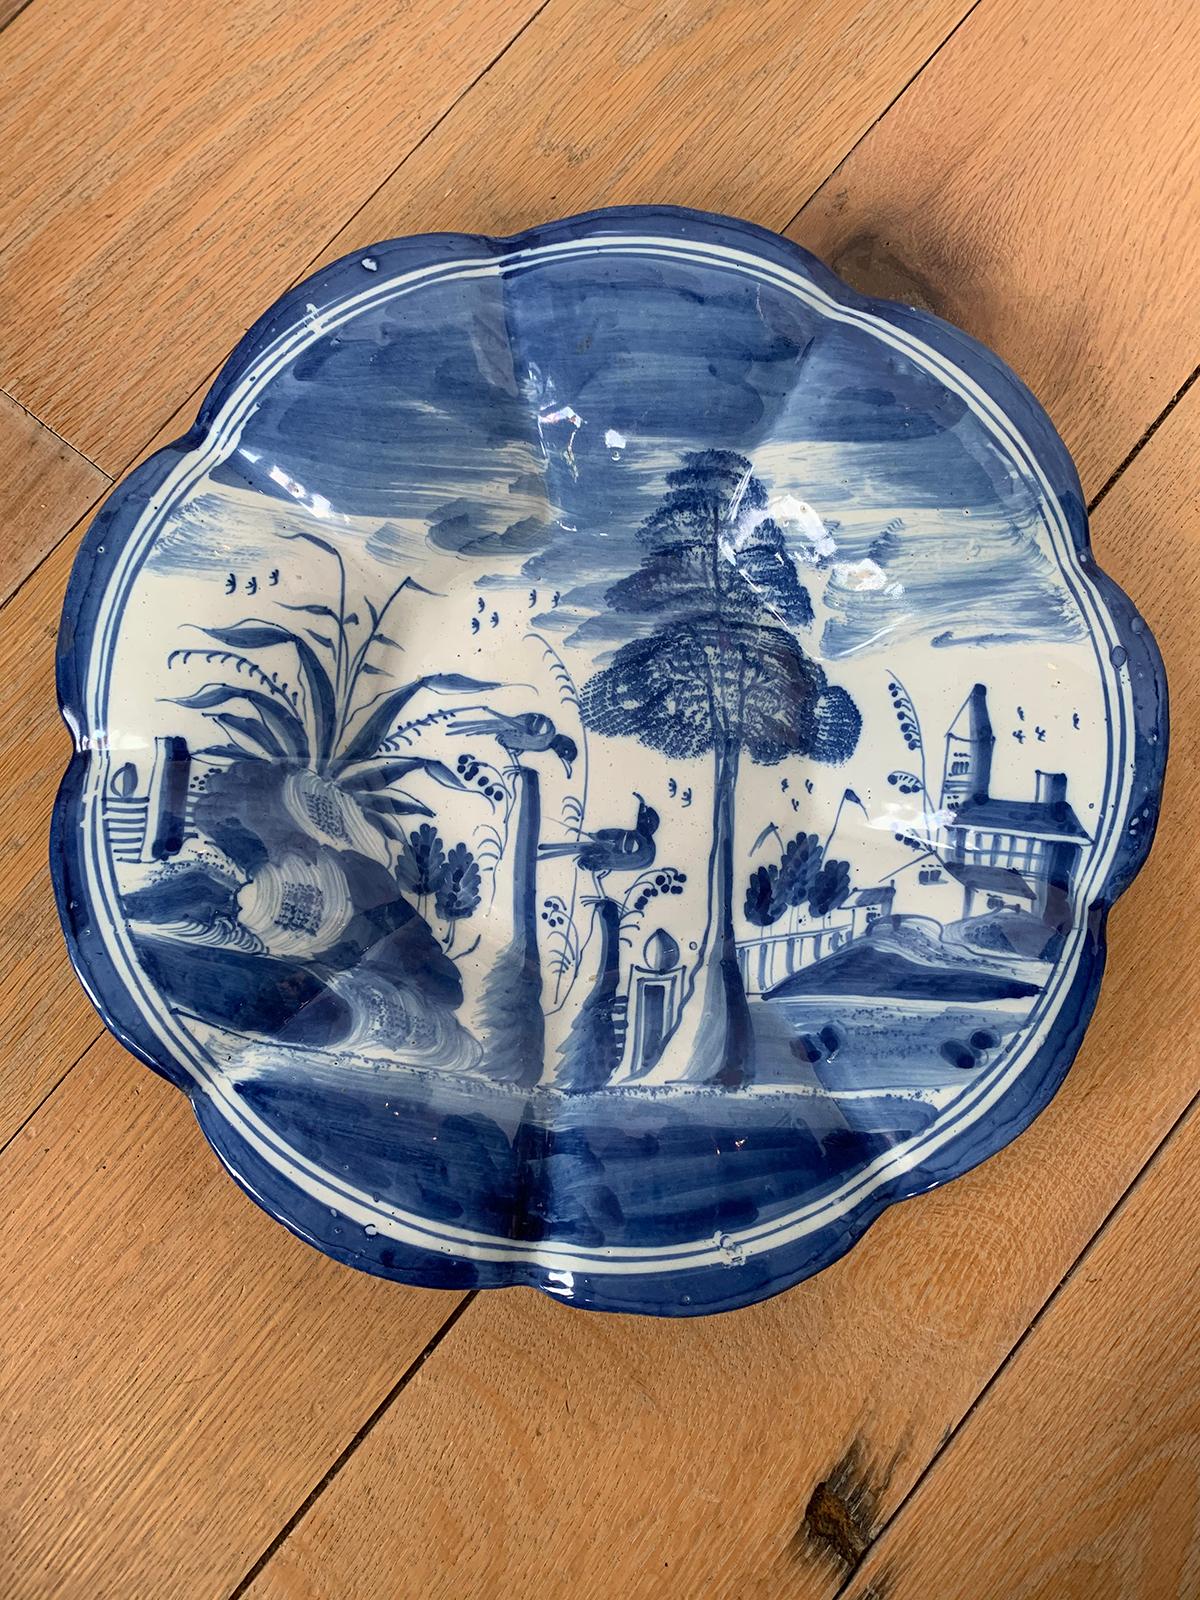 18th century delft blue and white porcelain round scalloped charger, unmarked.